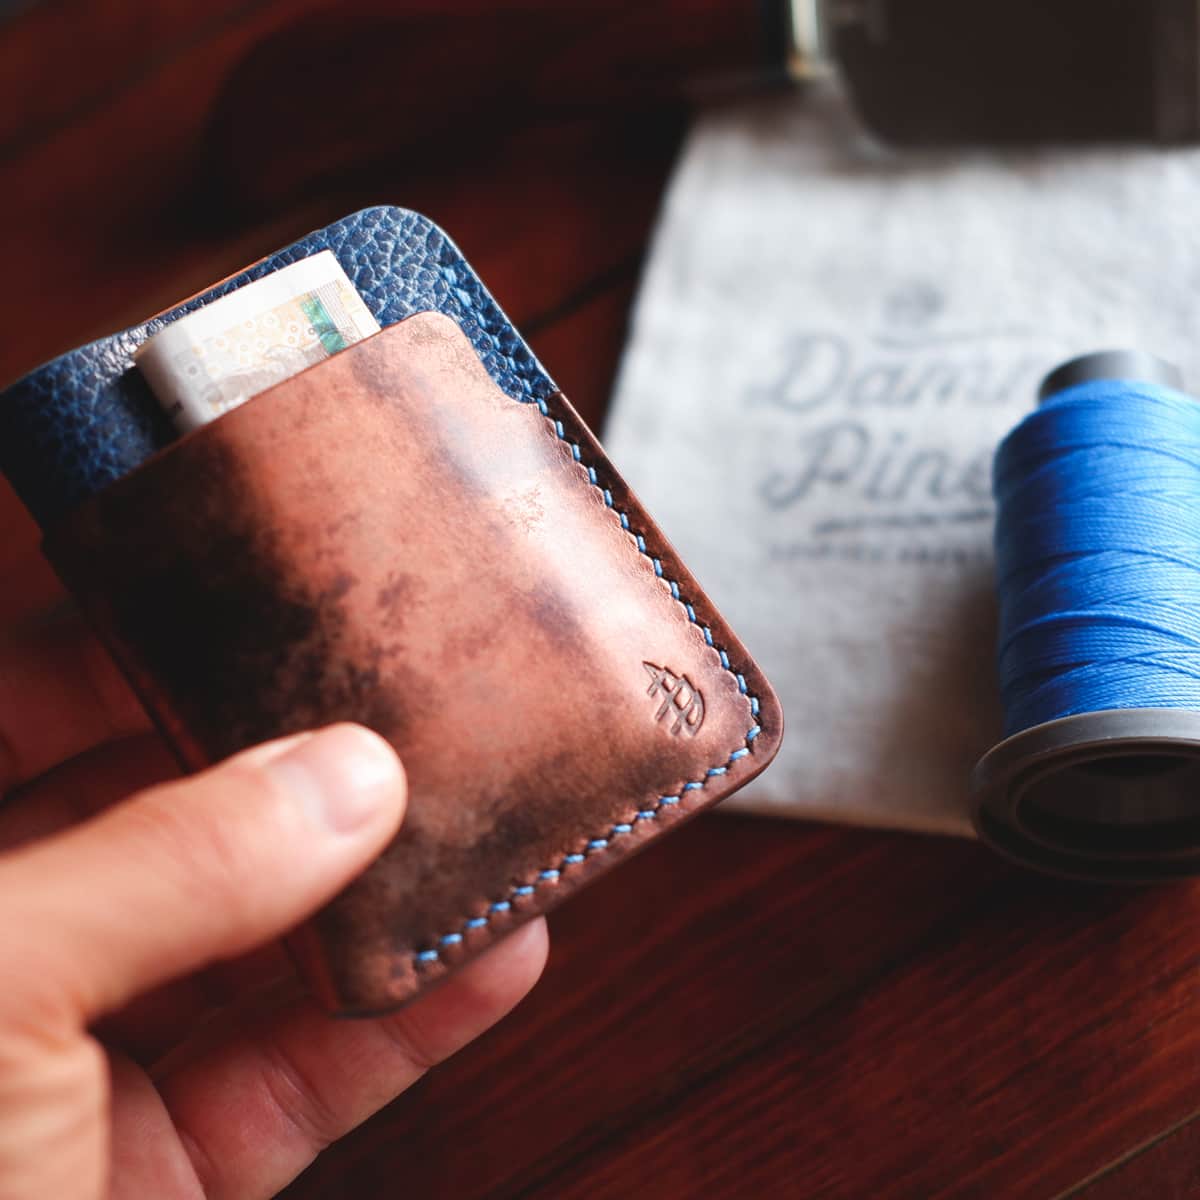 The Vertical Card Holder in Rame Bisanzio and Blue Tartufo full grain vegetable tanned leather held in hand